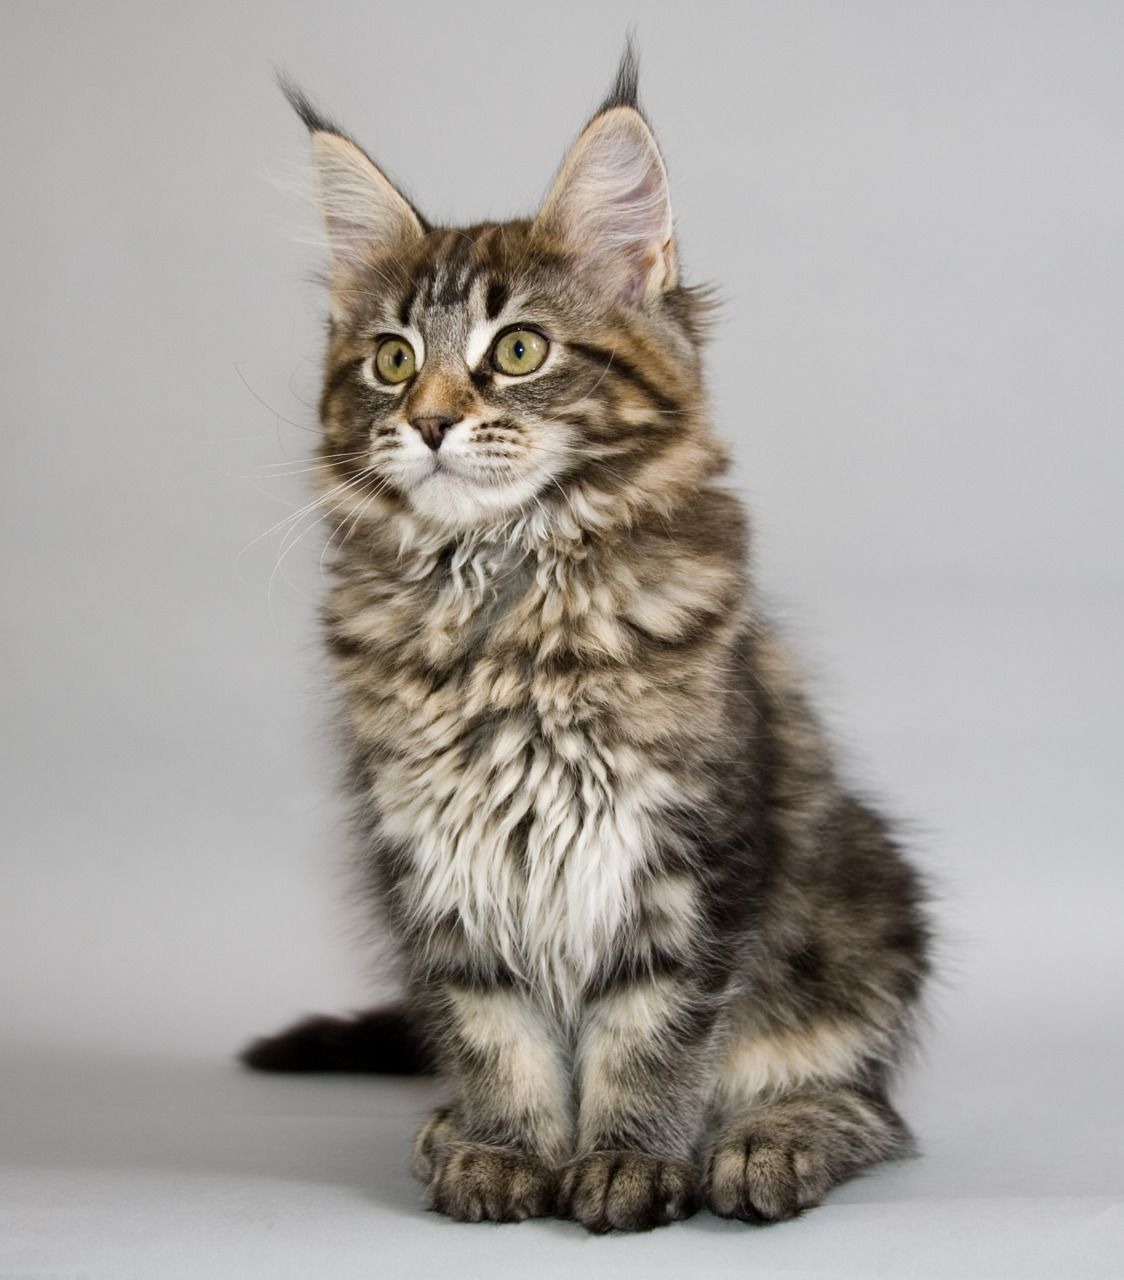 The Maine Coon